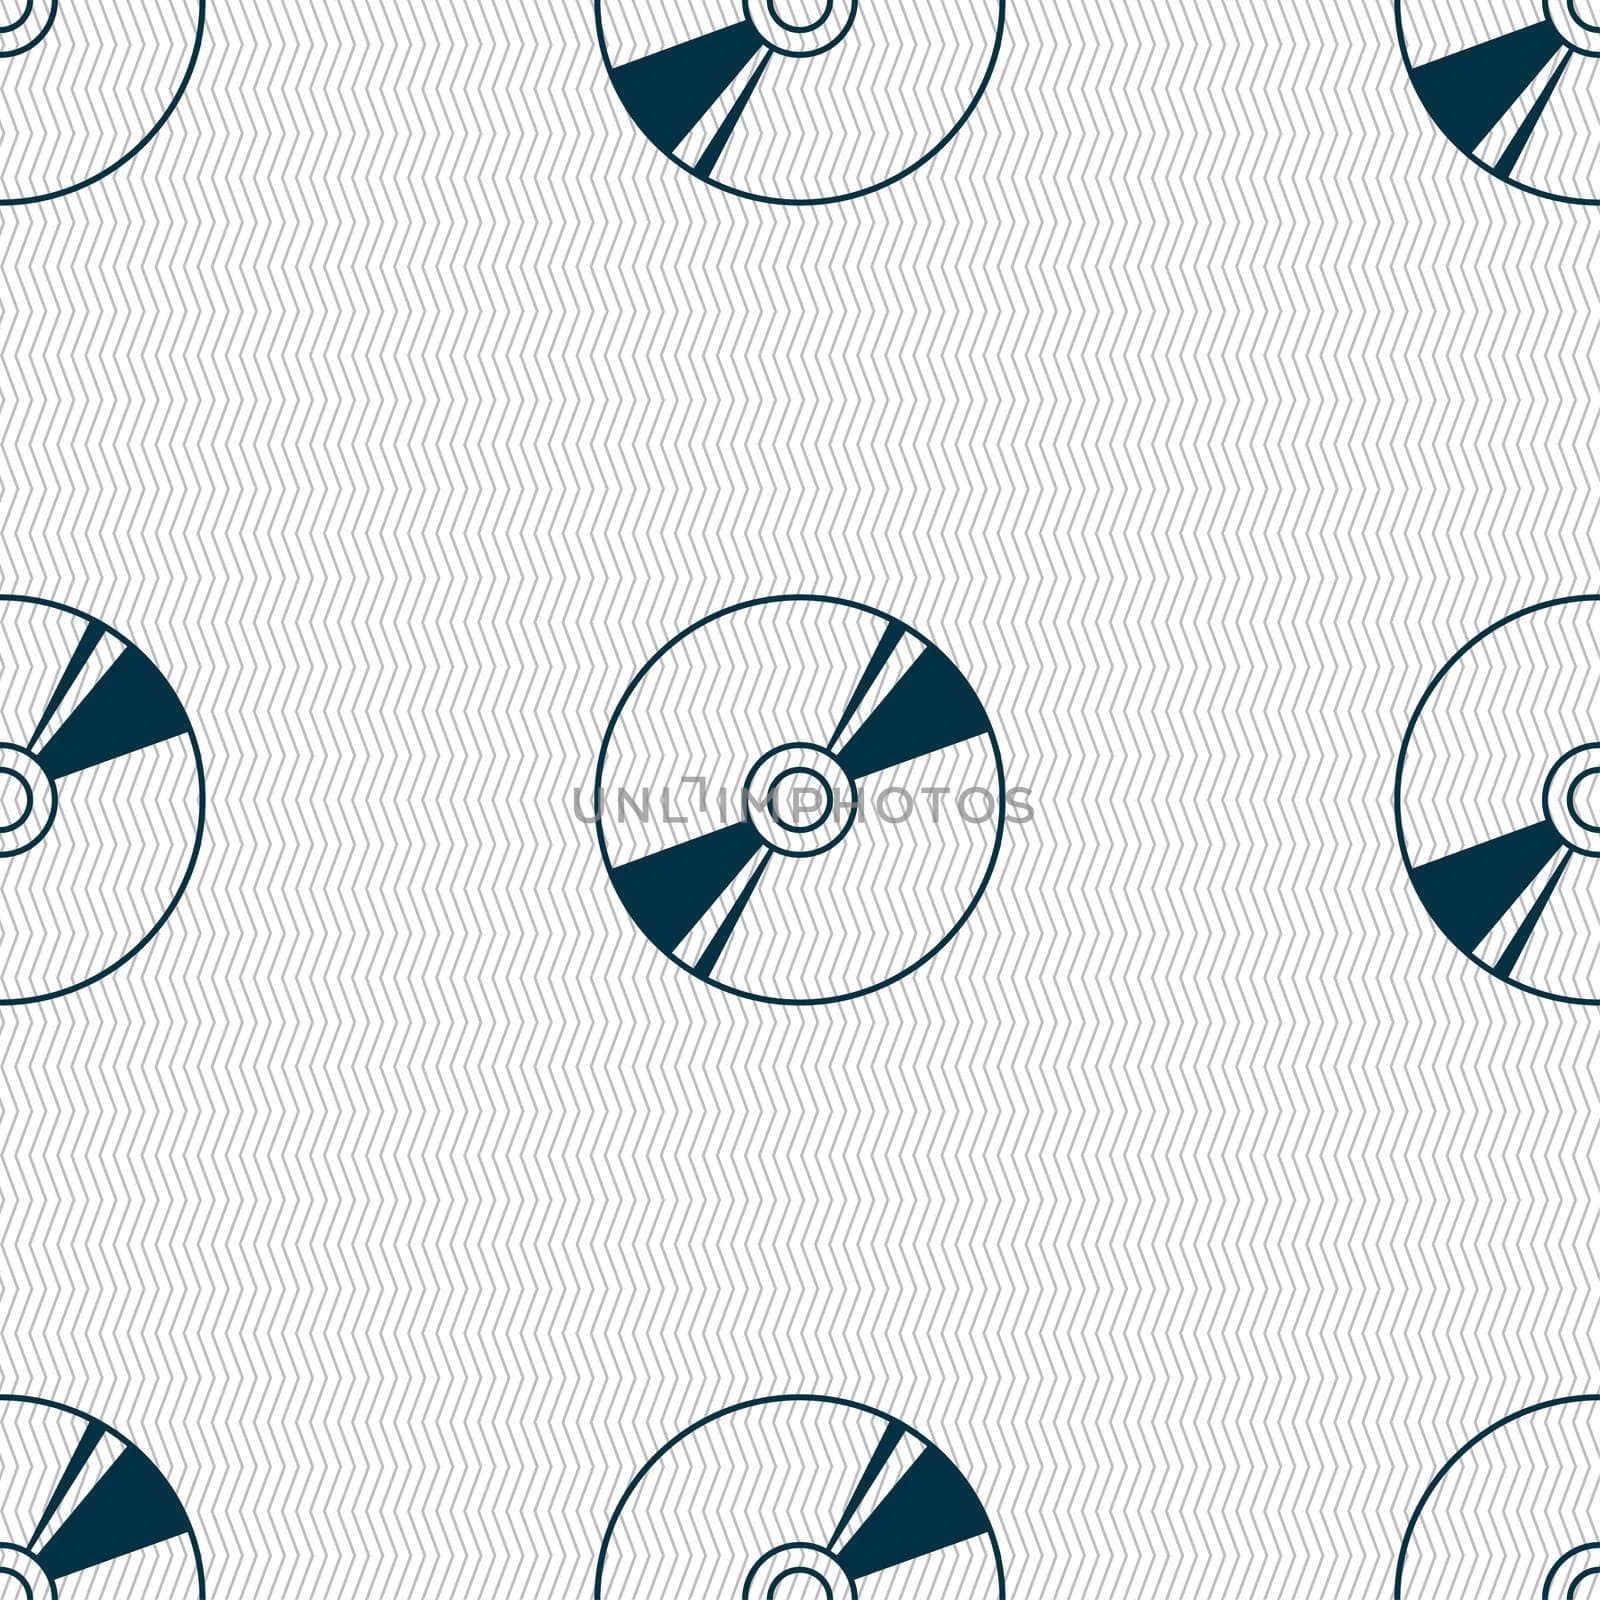 Cd, DVD, compact disk, blue ray icon sign. Seamless pattern with geometric texture.  by serhii_lohvyniuk